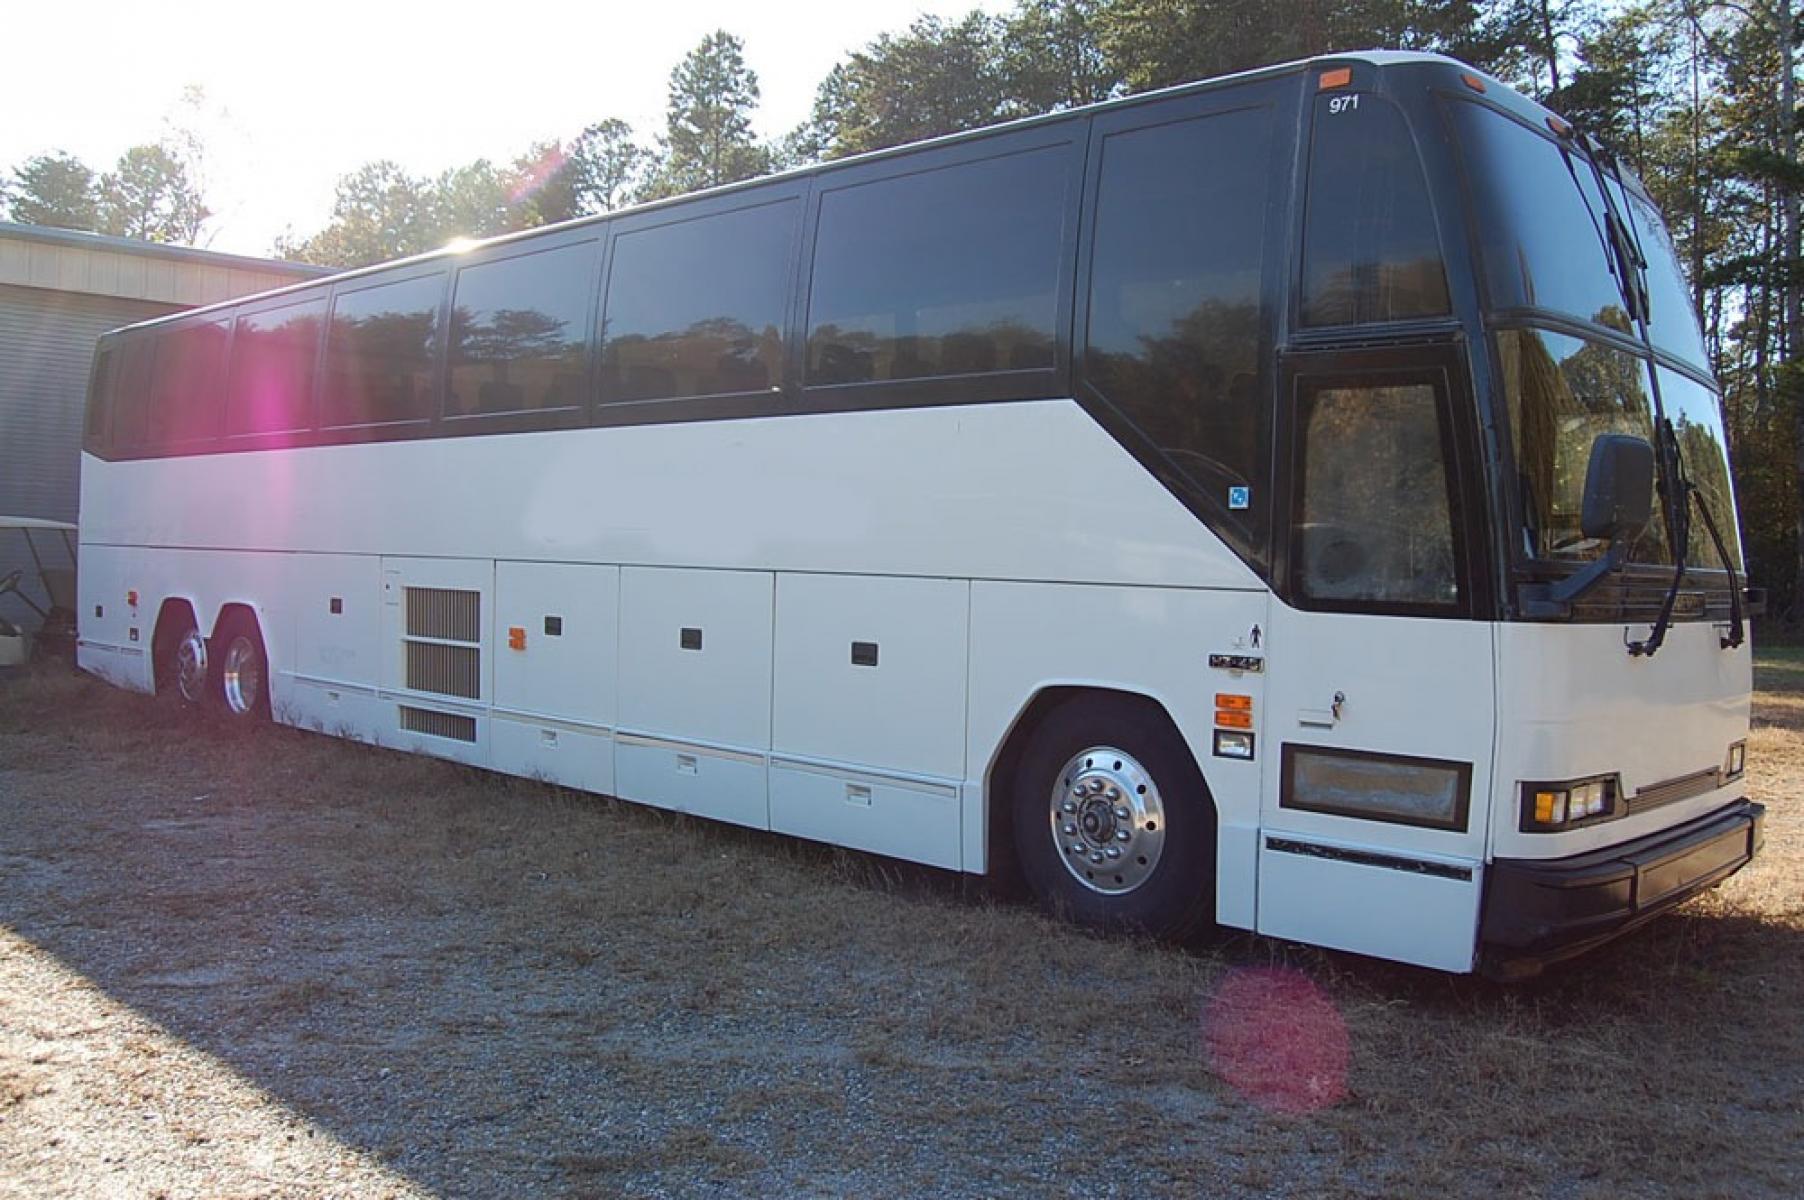 1997 Prevost HS-45 with an Detroit Diesel Series 60 engine, Allison transmission, 0.000000, 0.000000 - 1997 Prevost H3-45 - Series 60 Detroit Diesel - Allison Automatic Transmission - 45' - Alloy Wheels - 56 Passengers - Open Parcel Racks - 3 Monitors and DVD – Restroom - Photo #0